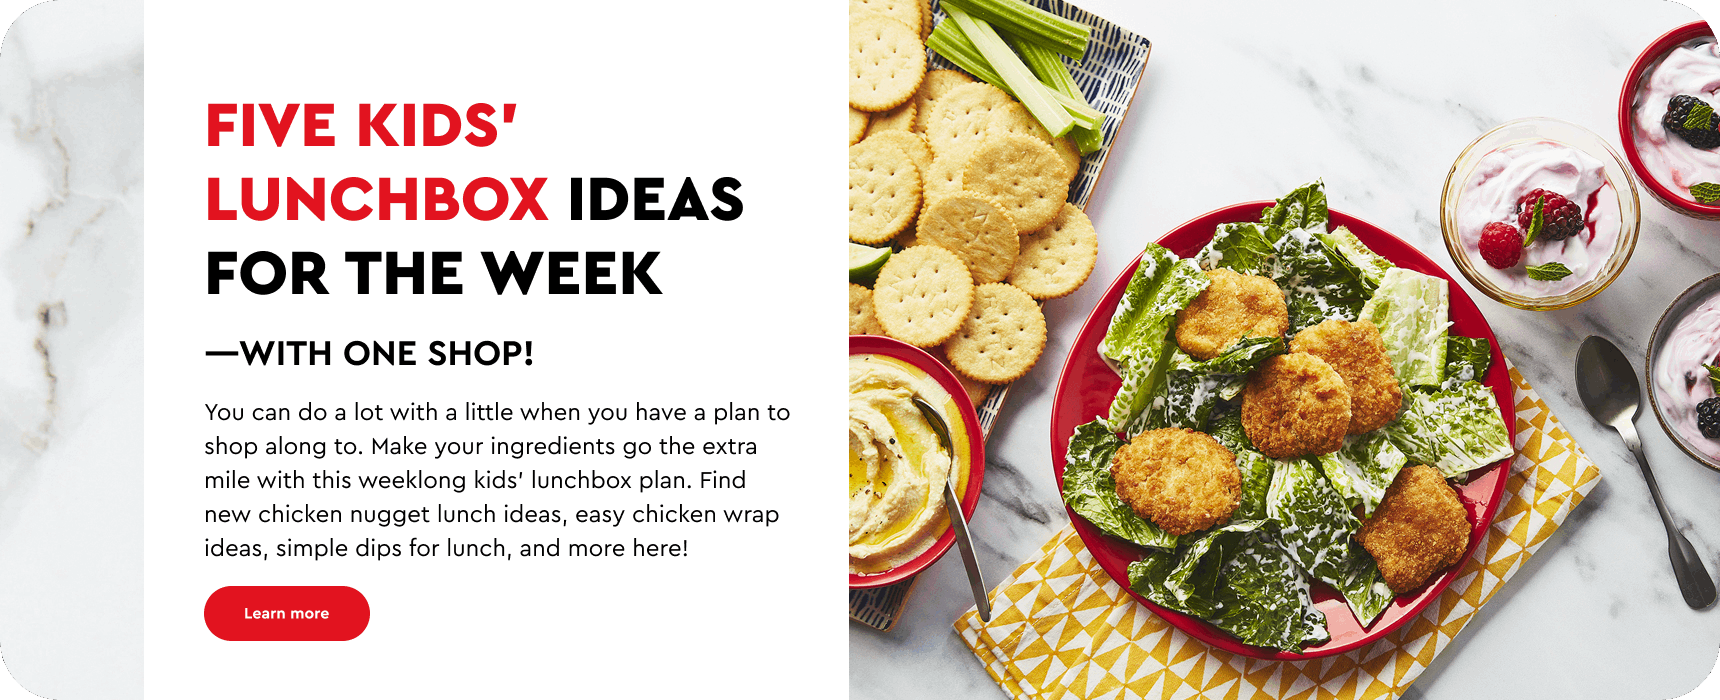 Five kids’ lunchbox ideas for the week—with one shop!